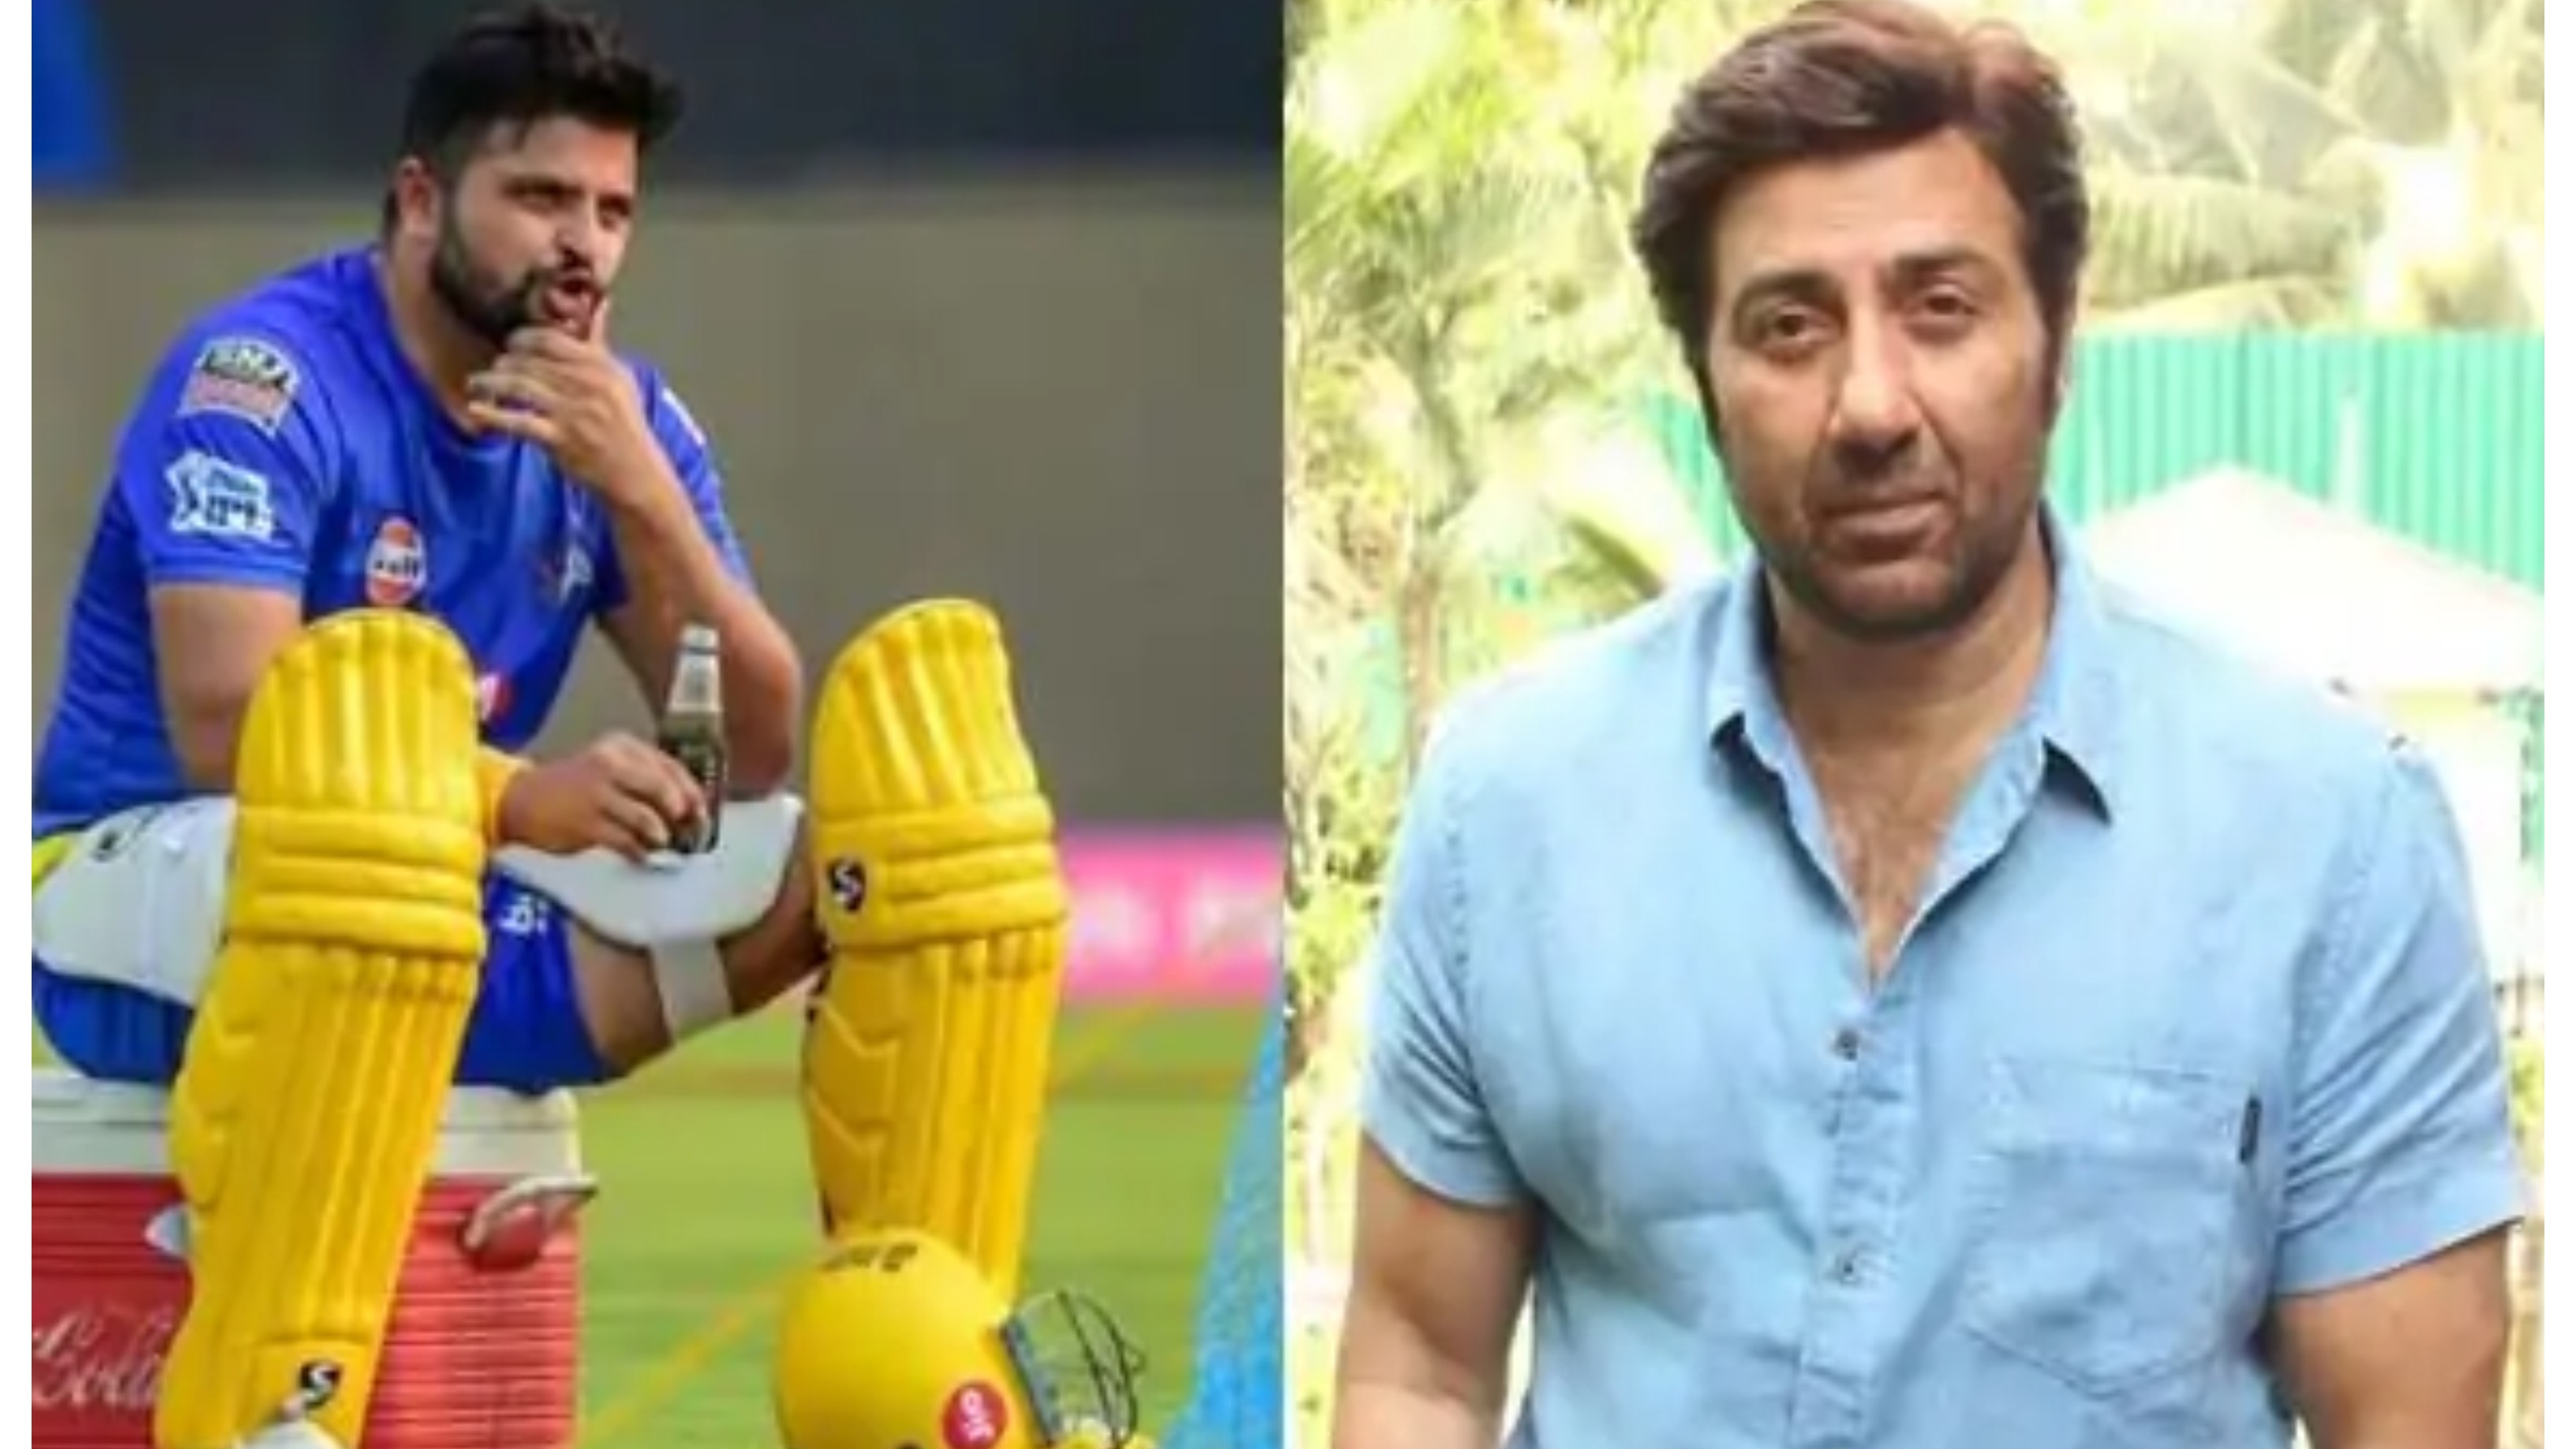 BJP MP Sunny Deol hopes Suresh Raina’s relatives will get justice soon